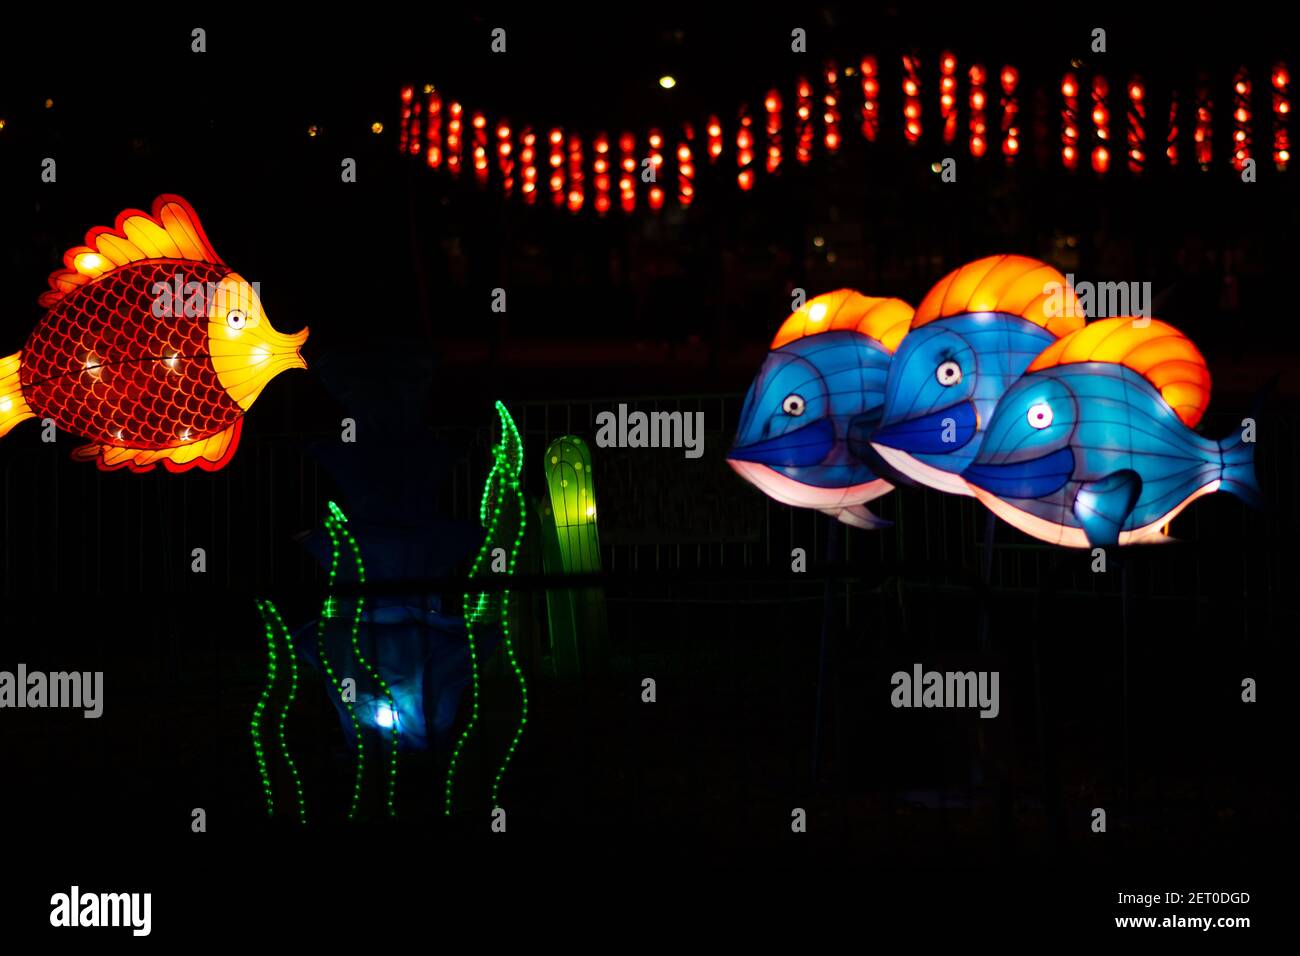 The Chinese Lantern Festival. A colorful fish lantern is swimming above the glowing seaweed. Three blue fish are in a blurry background. Stock Photo